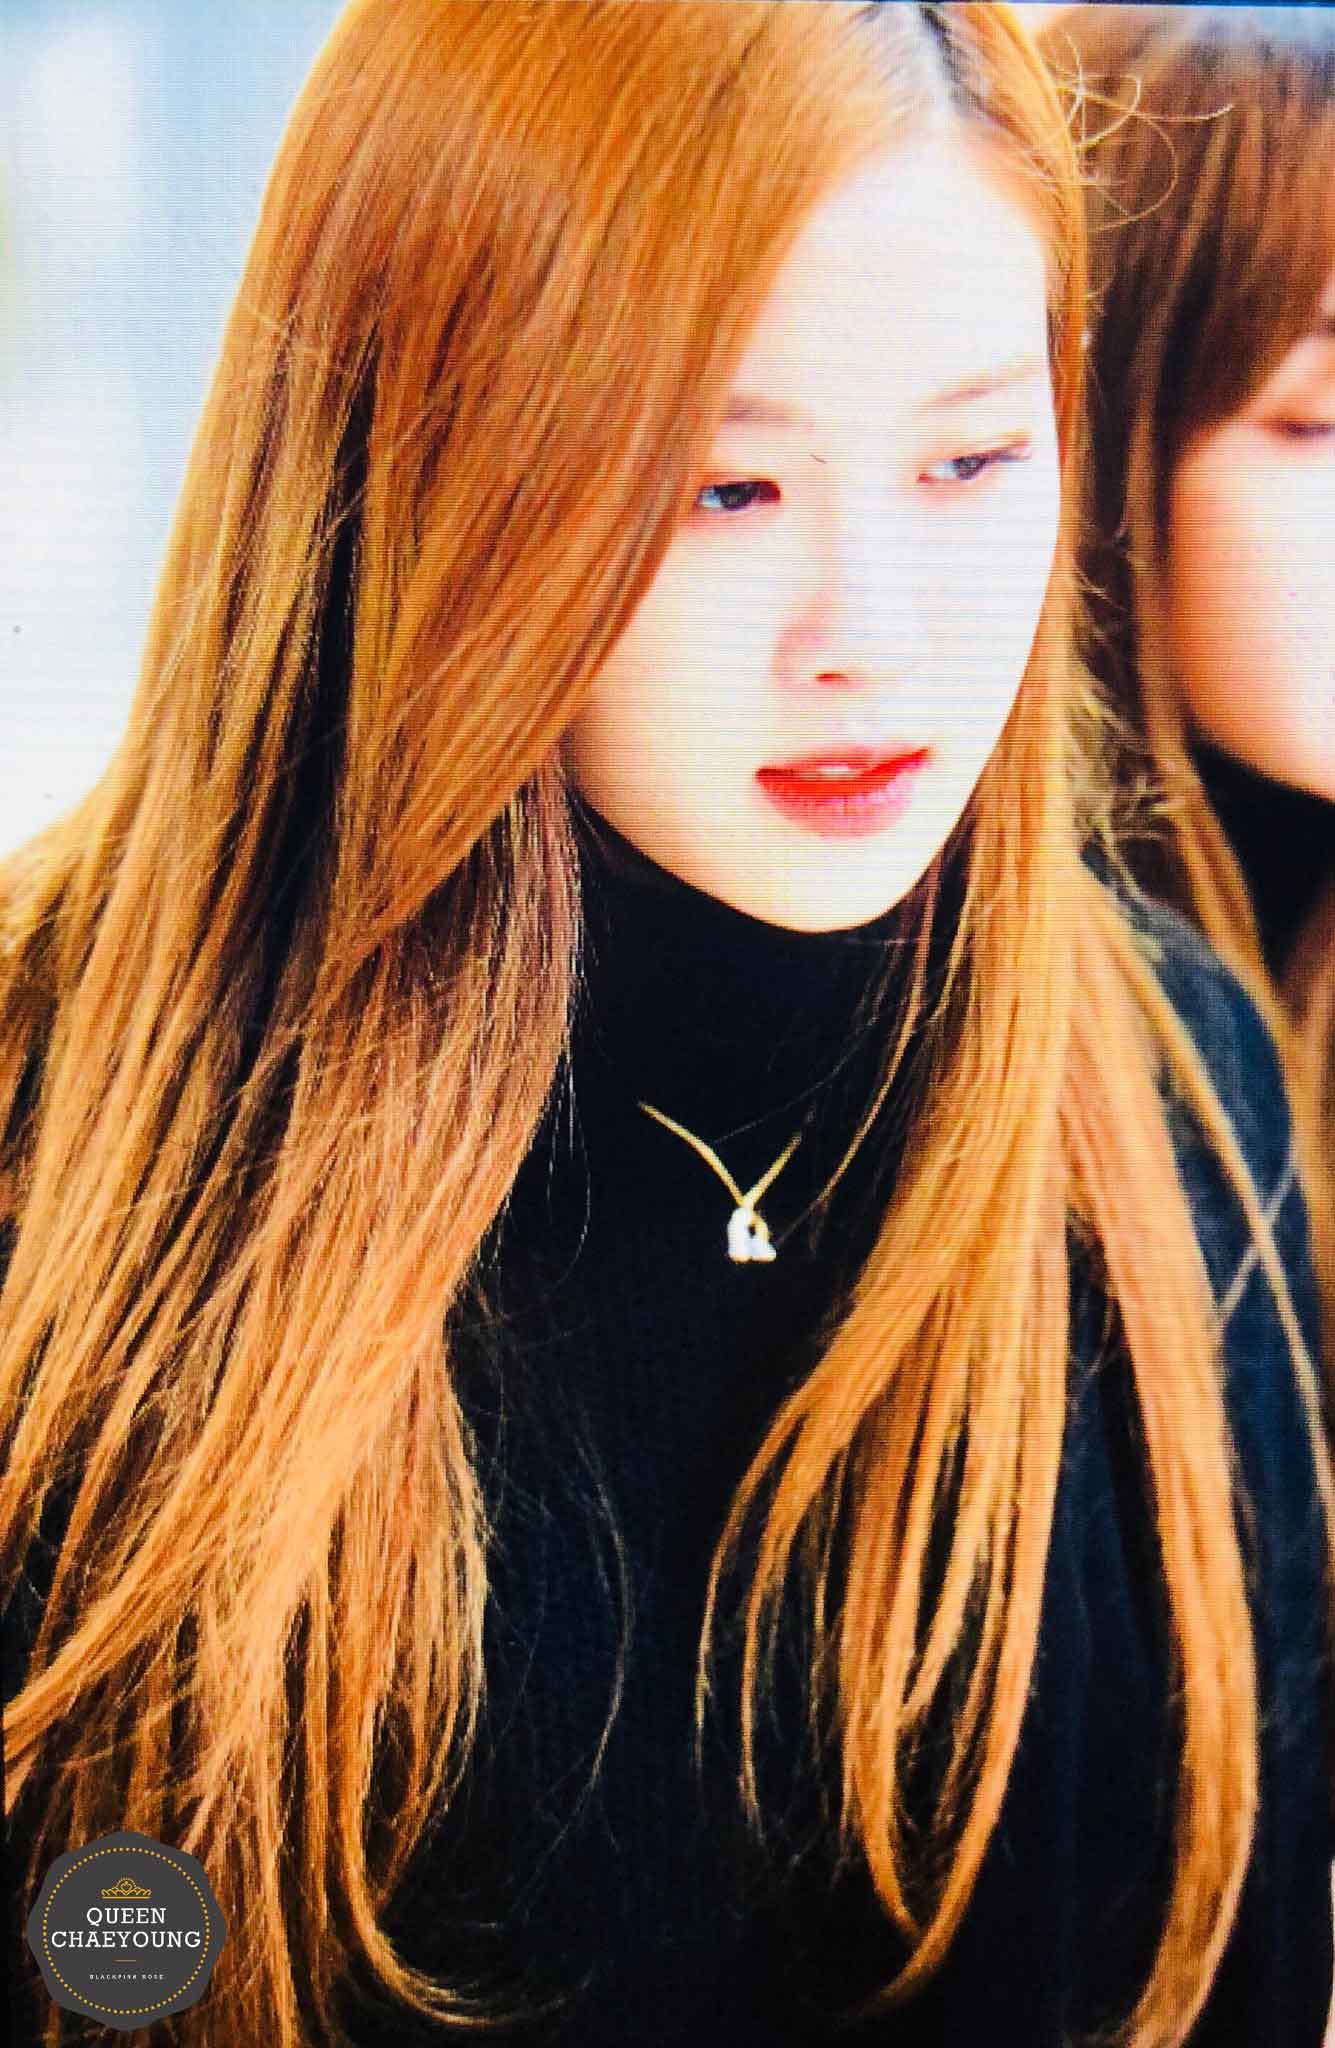 Blackpink Rose Winter Airport Style From Jeju Island